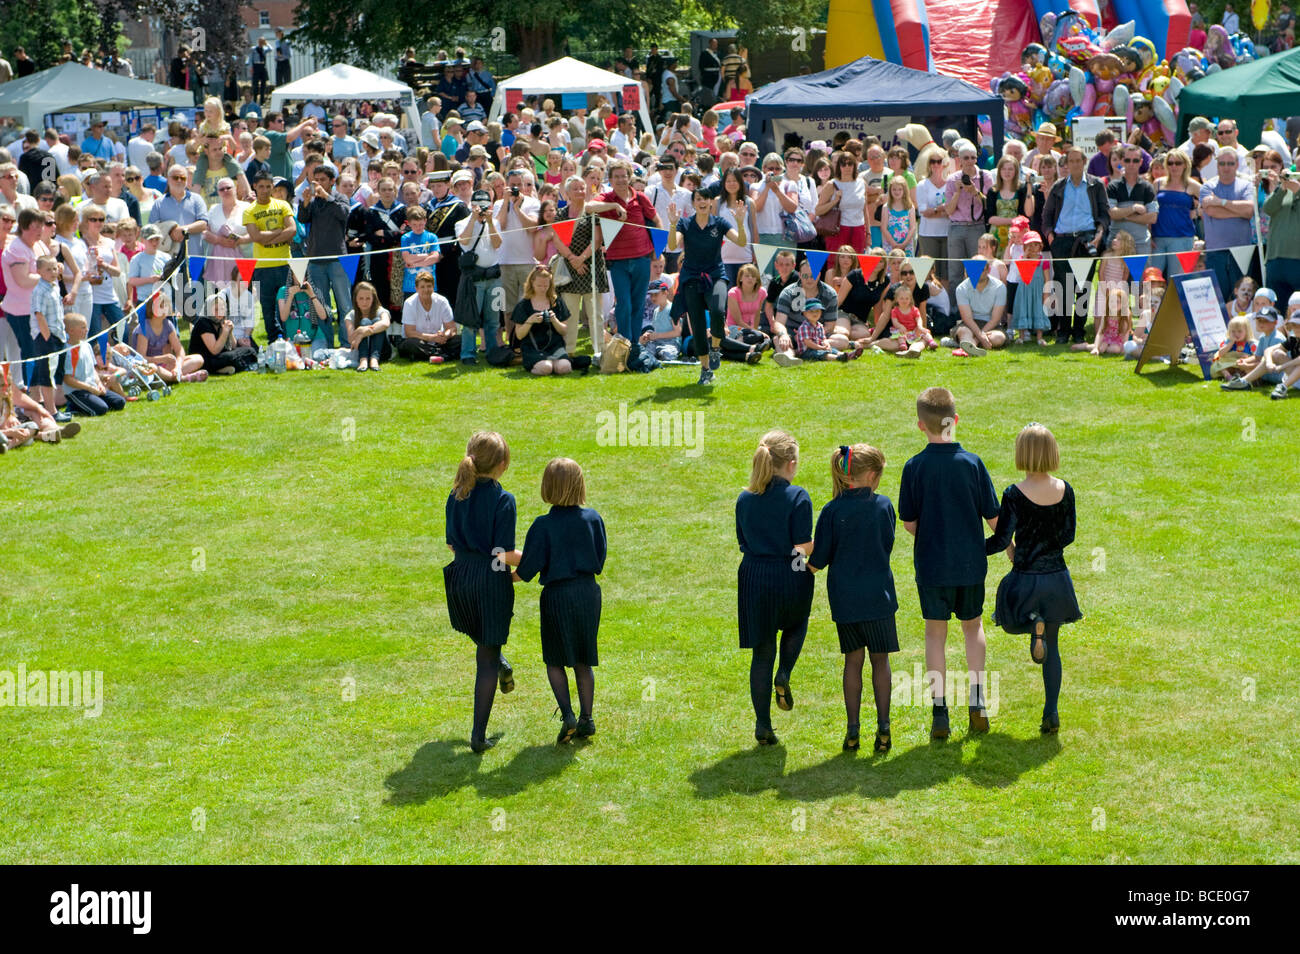 A Junior Irish Dance Group perform in front of crowds at the 2009 Tonbridge Carnival. Stock Photo